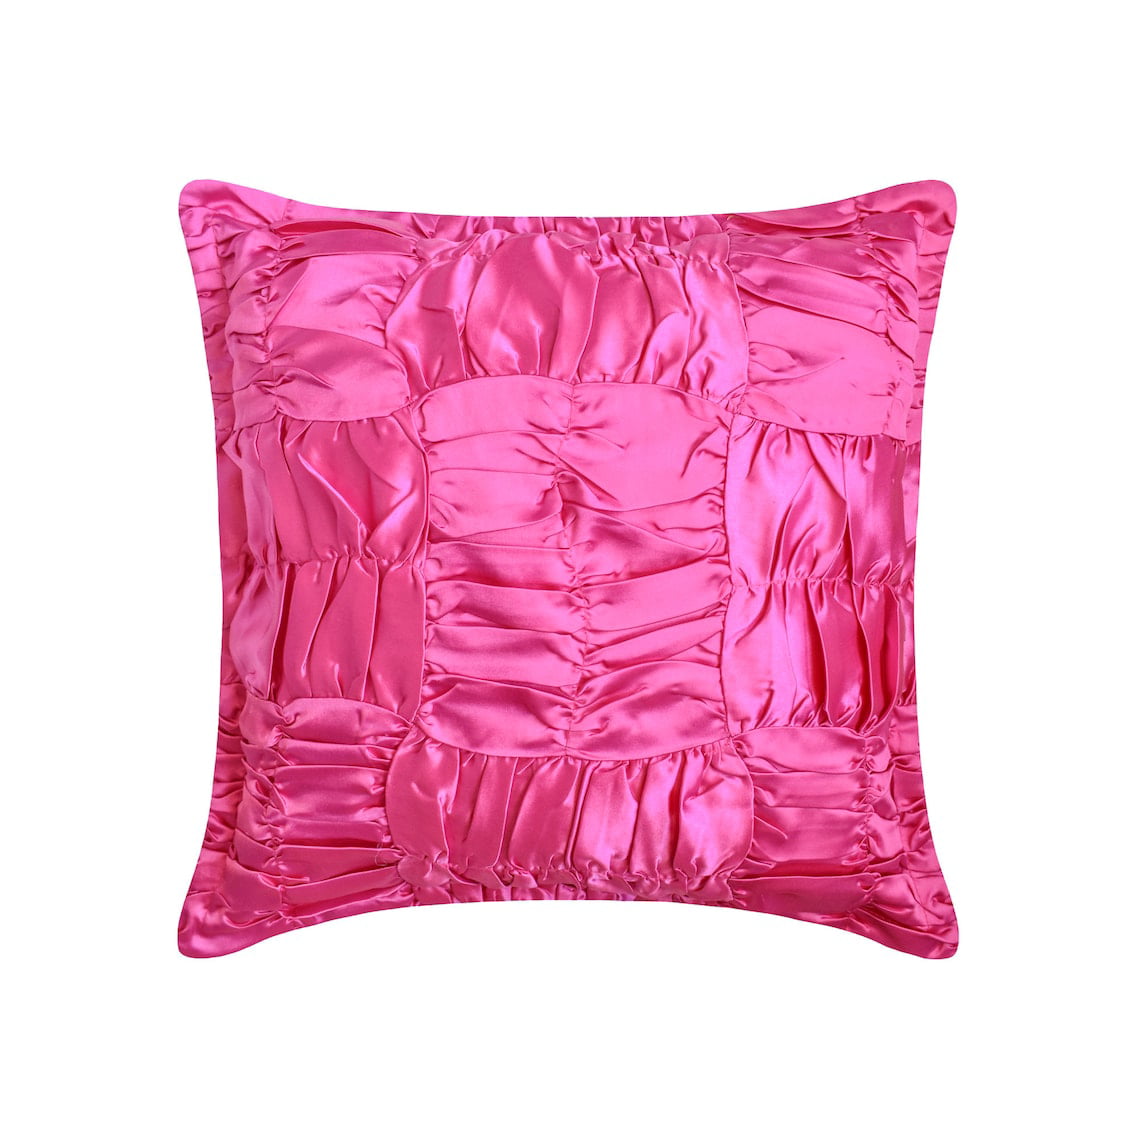 Pink square pillow with ruffles, Frilled pillow, Decorative pillow for  teepee